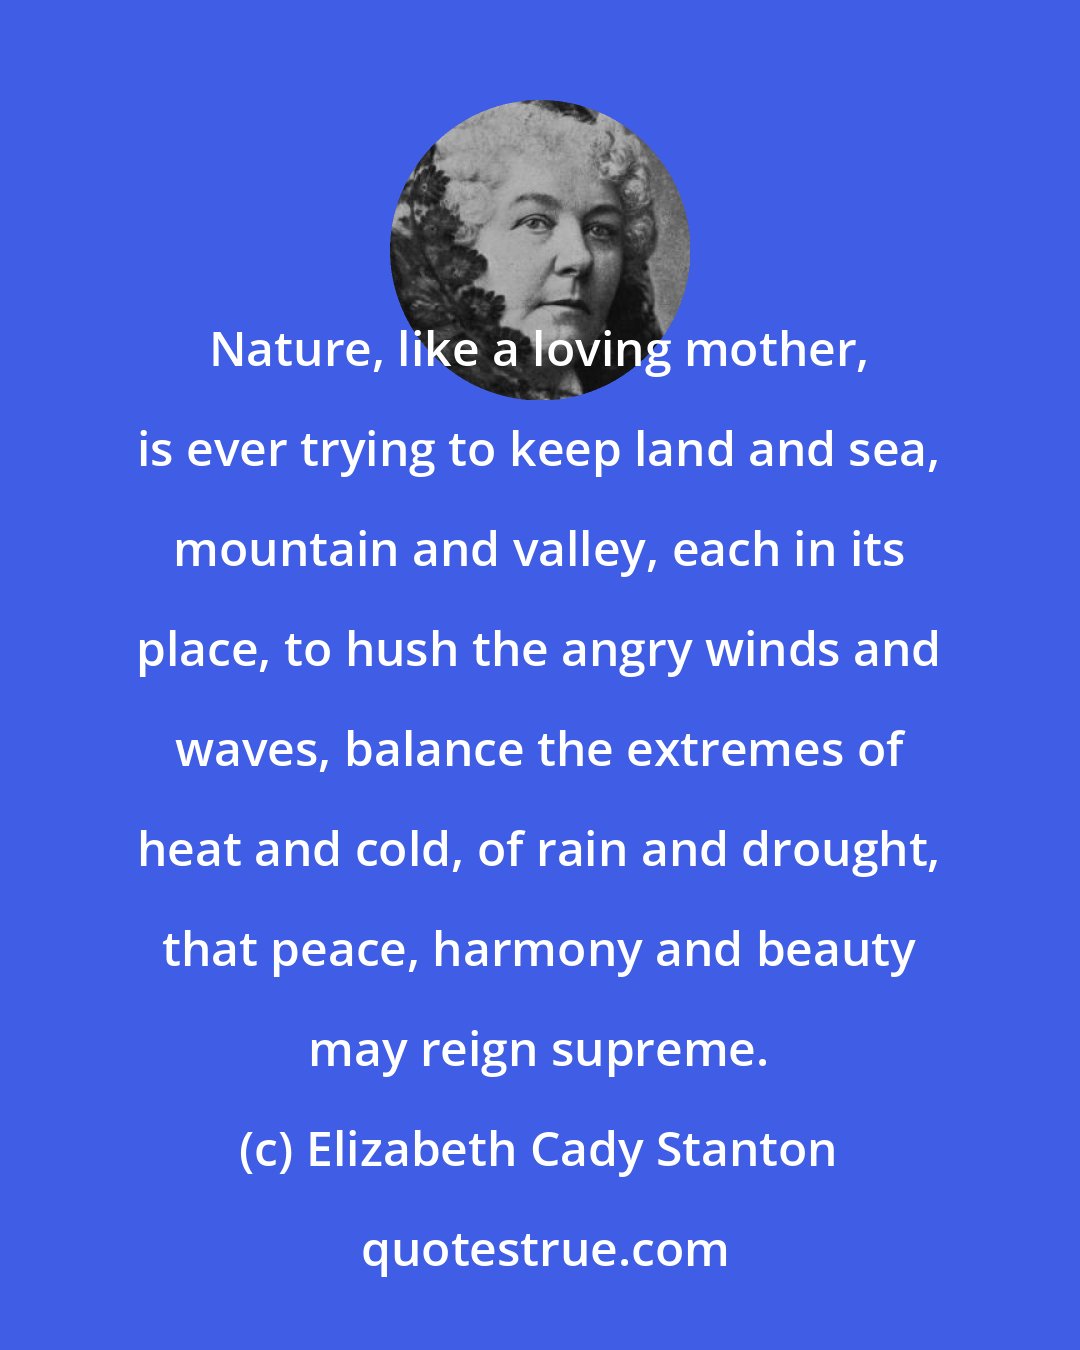 Elizabeth Cady Stanton: Nature, like a loving mother, is ever trying to keep land and sea, mountain and valley, each in its place, to hush the angry winds and waves, balance the extremes of heat and cold, of rain and drought, that peace, harmony and beauty may reign supreme.